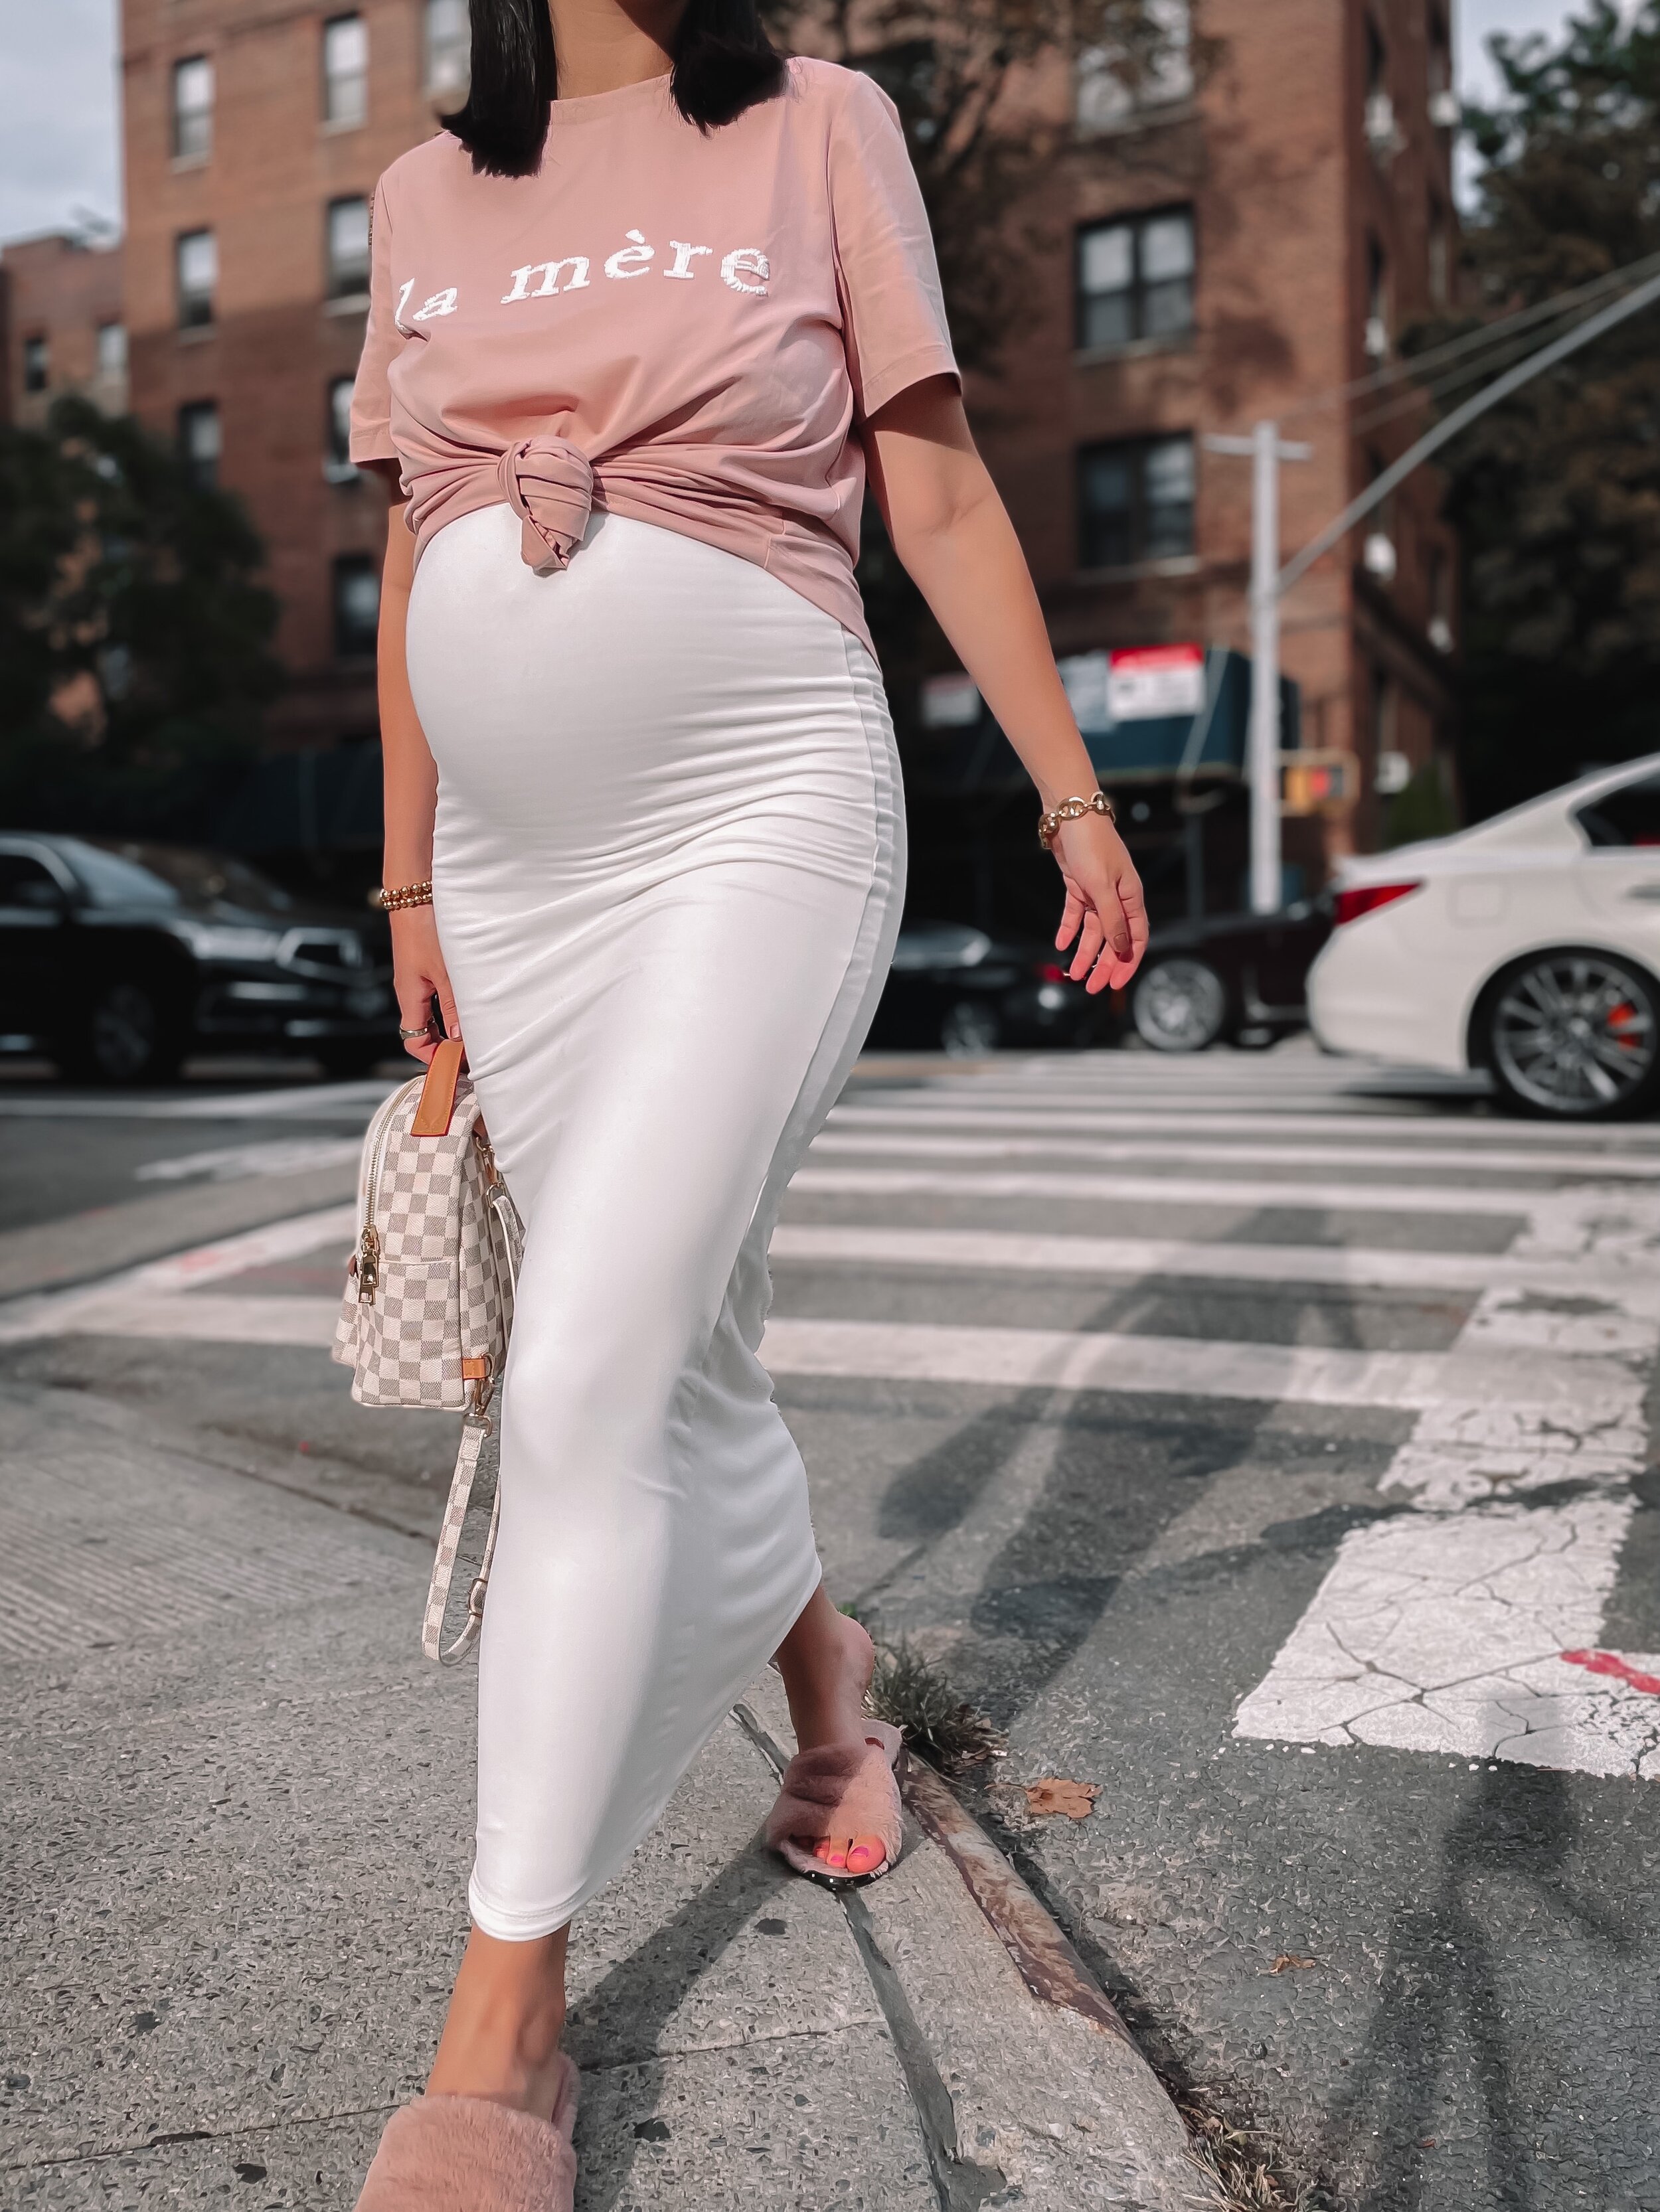 White Bumpsuit Dress Pink 'La Mère' Tee 33 Week Update Esther Santer NYC Street Style Blogger Pregnancy Bump Style Friendly Maternity Fashion Bae the Label Kenneth Cole Fur Slides Goodnight Macaroon Backpack Cute Outfit Buy Shop  Expecting Mom OOTD.JPG